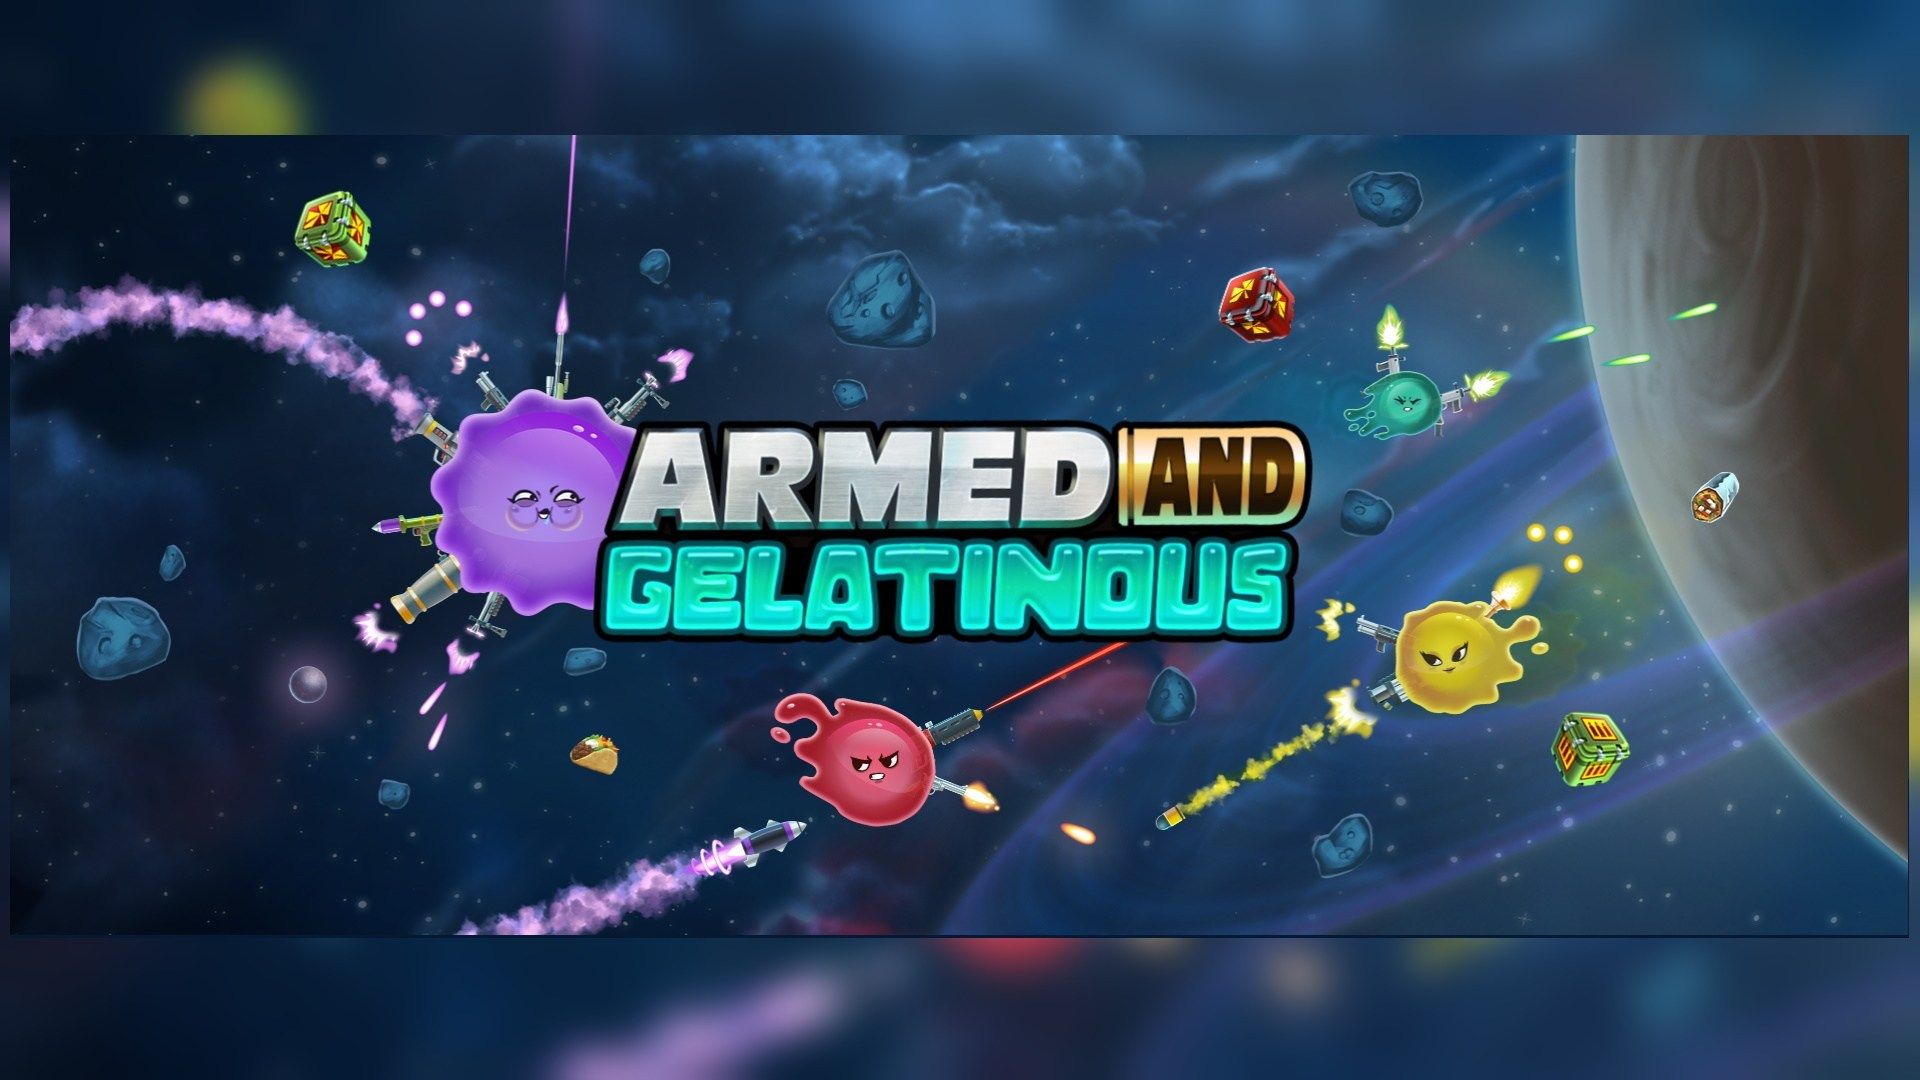 Armed and Gelatinous Q3 to PS XBOX One and PC Steam